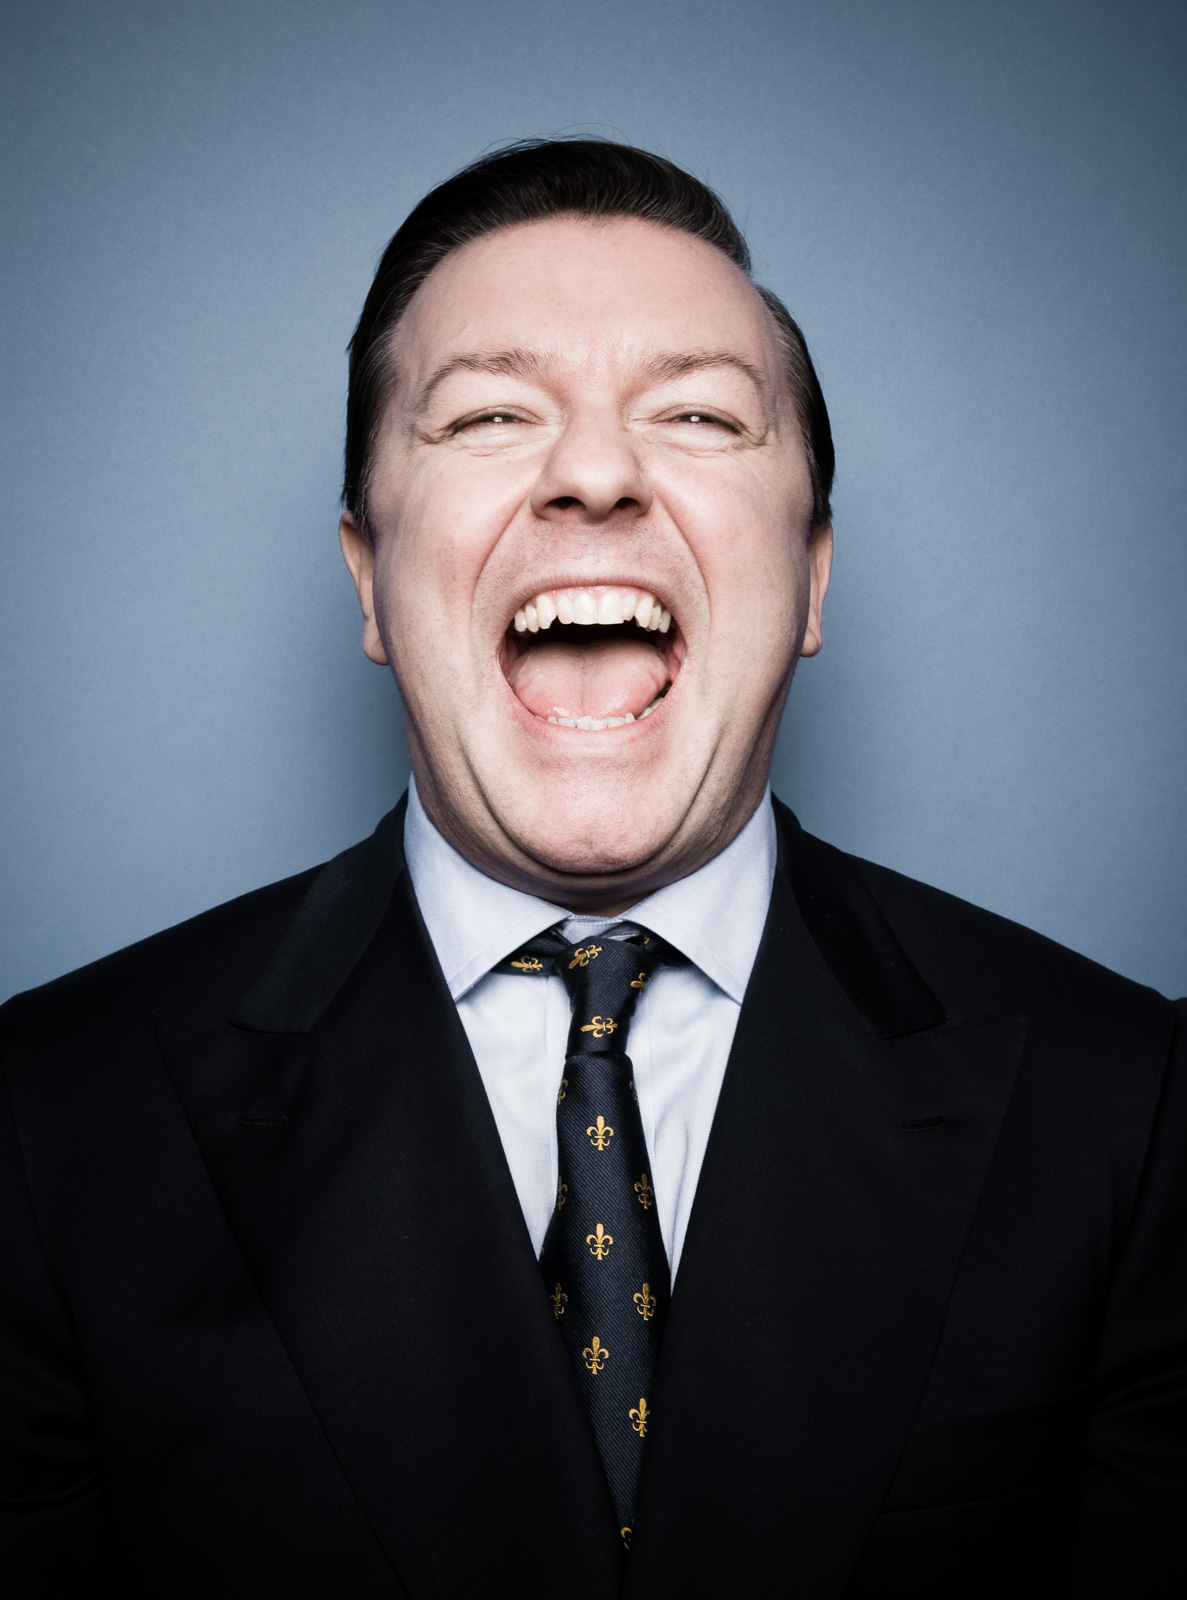 Ricky Gervais / Actor Comedian and Writer